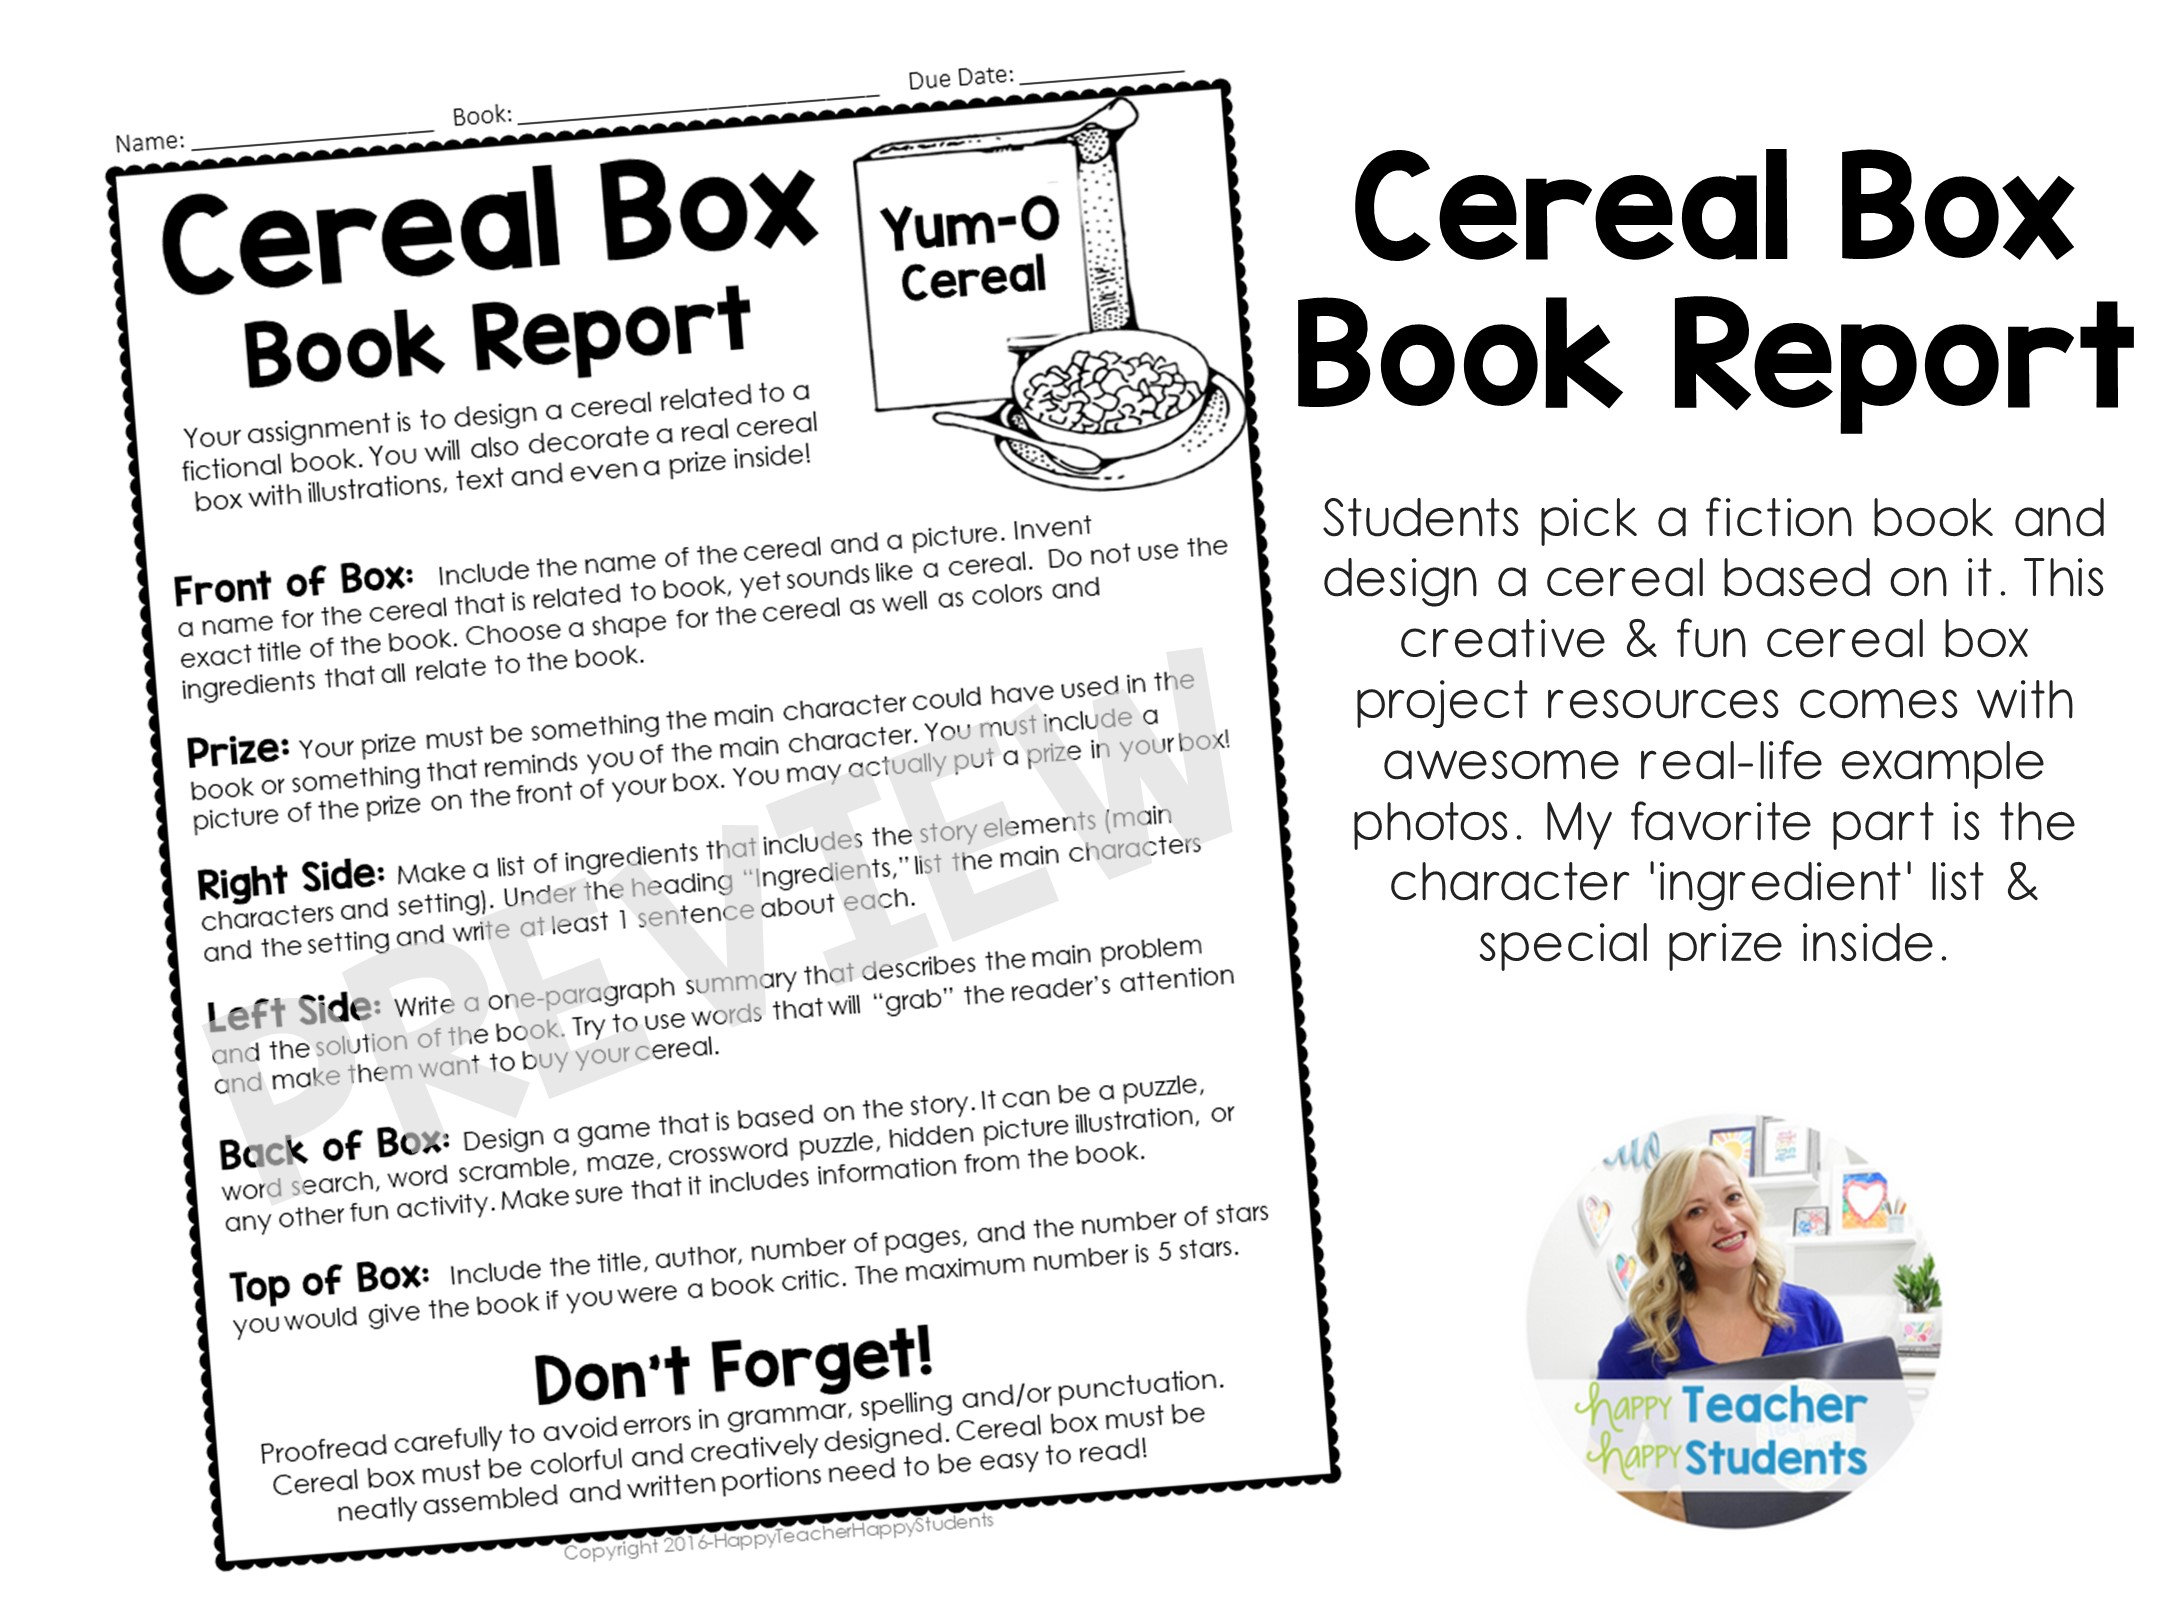 cereal box book report back of box